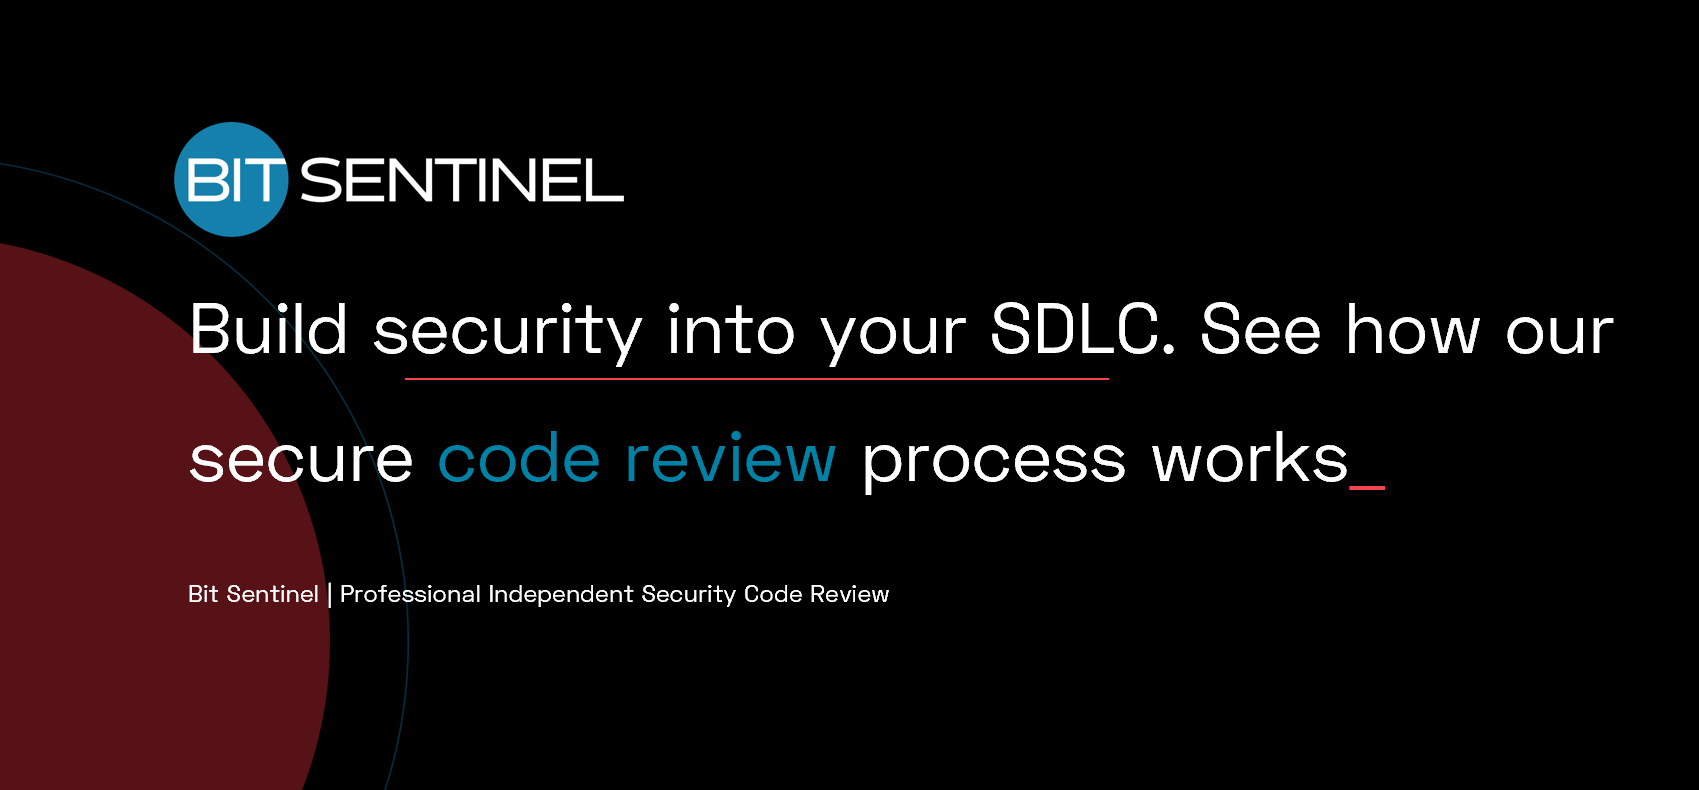 Professional Independent Security Code Review Bit Sentinel